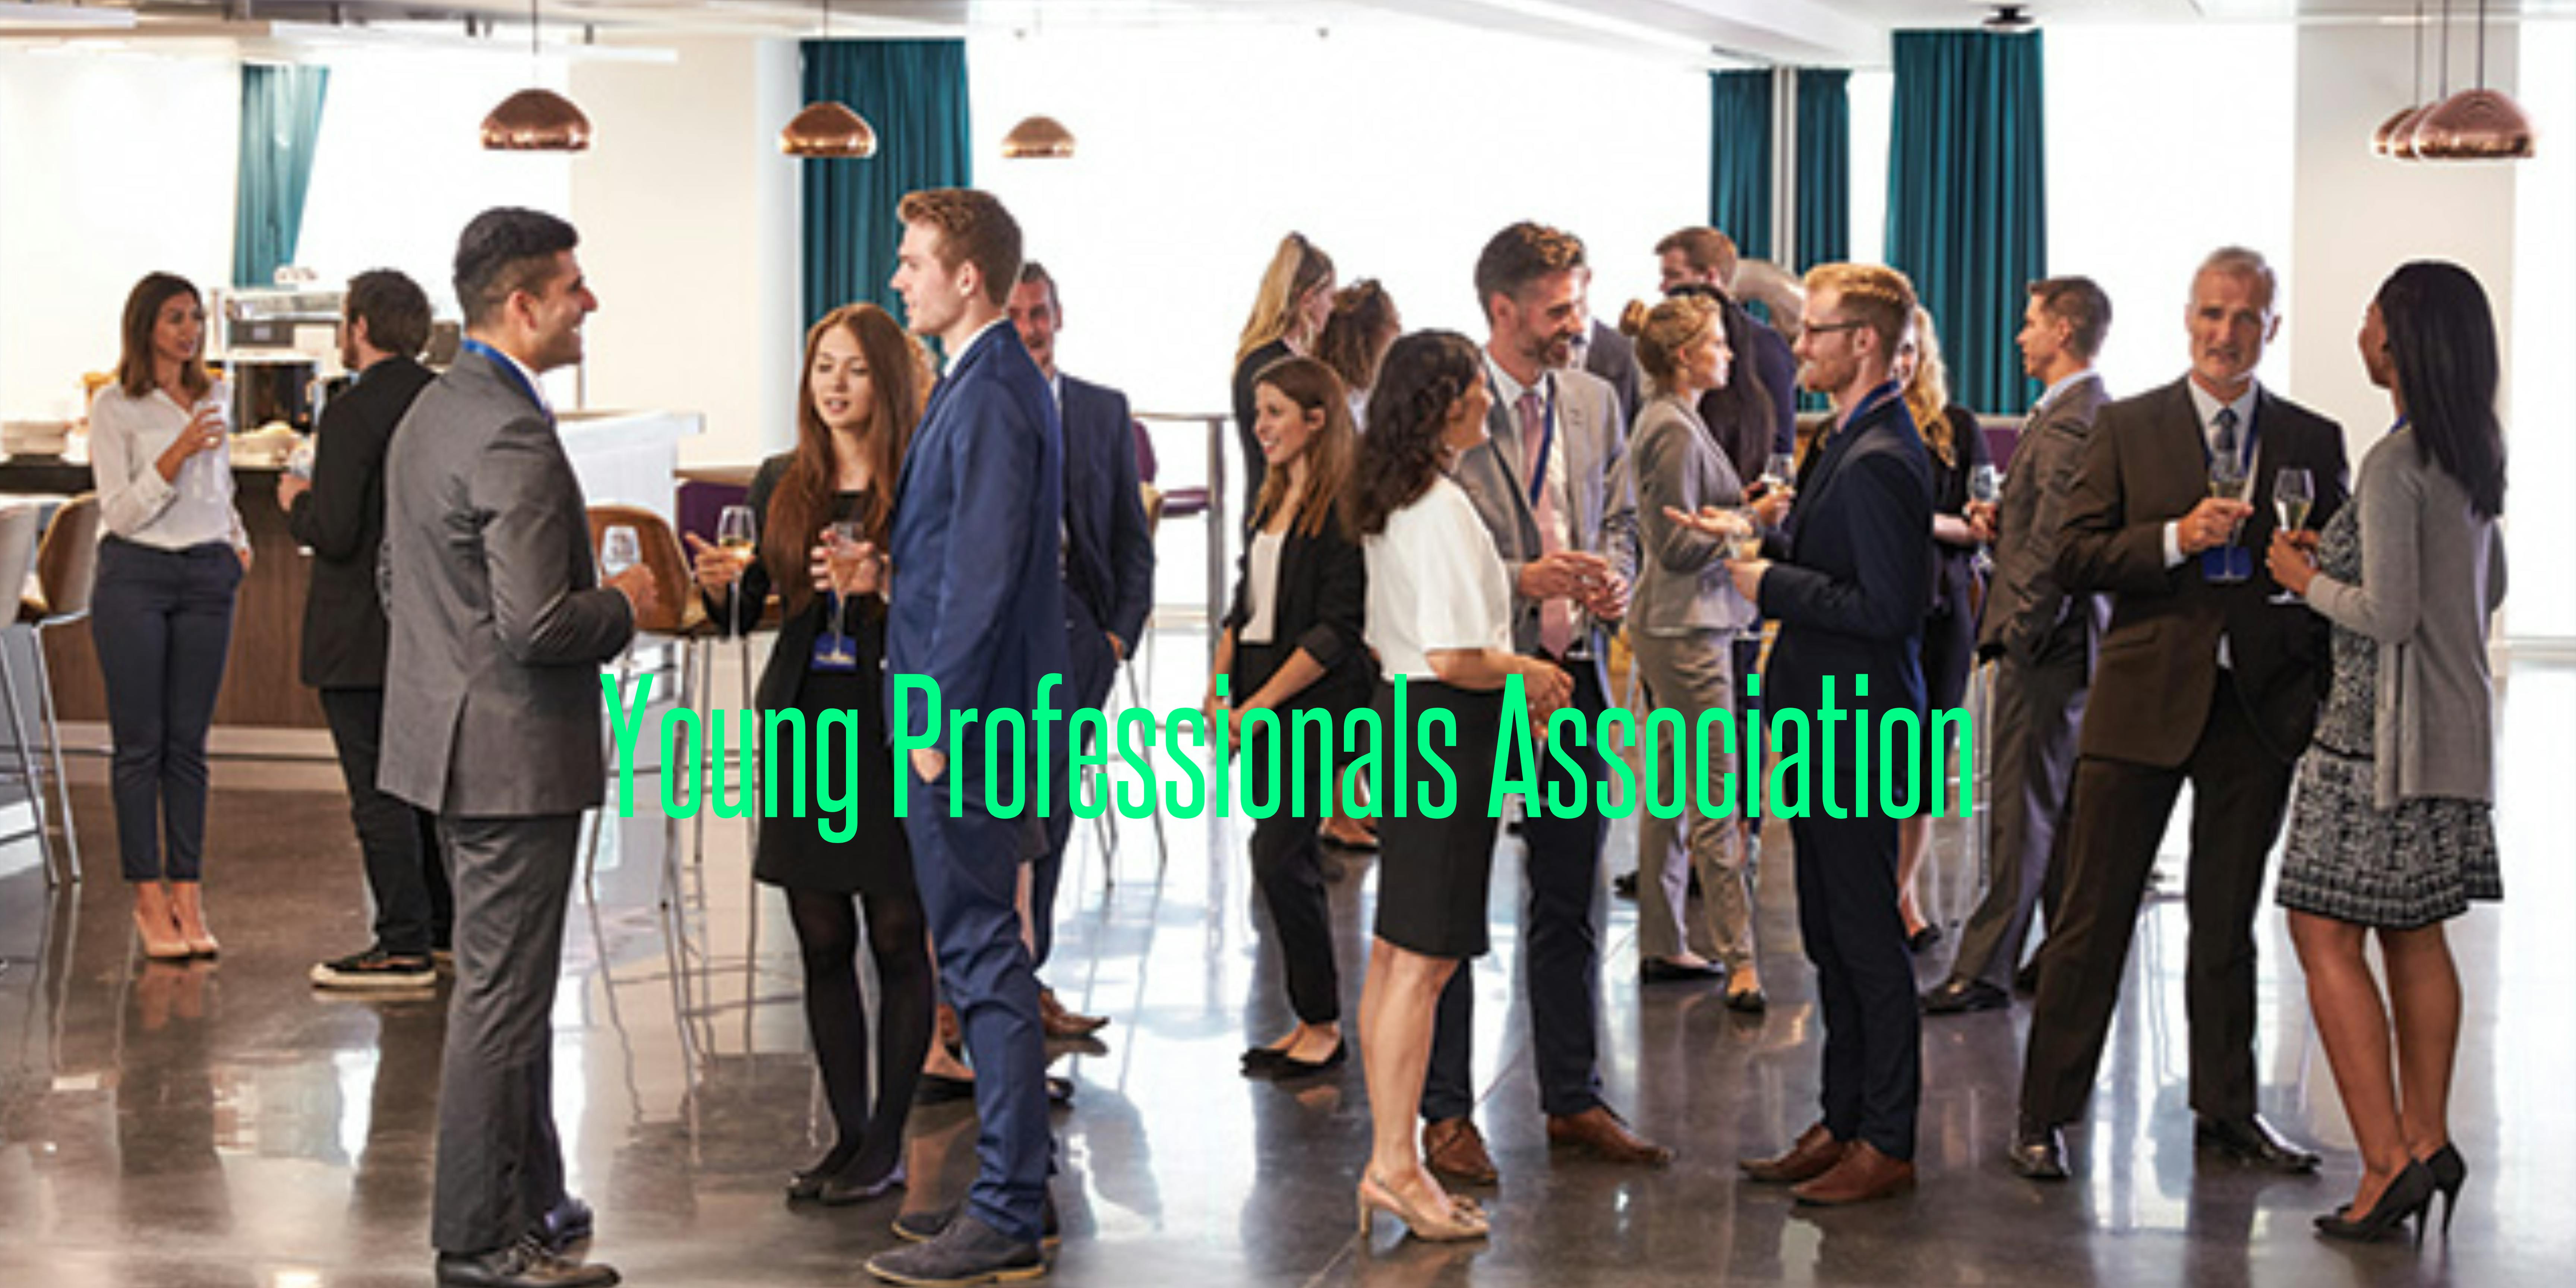 Big Brothers Big Sisters Young Professionals Association cover image